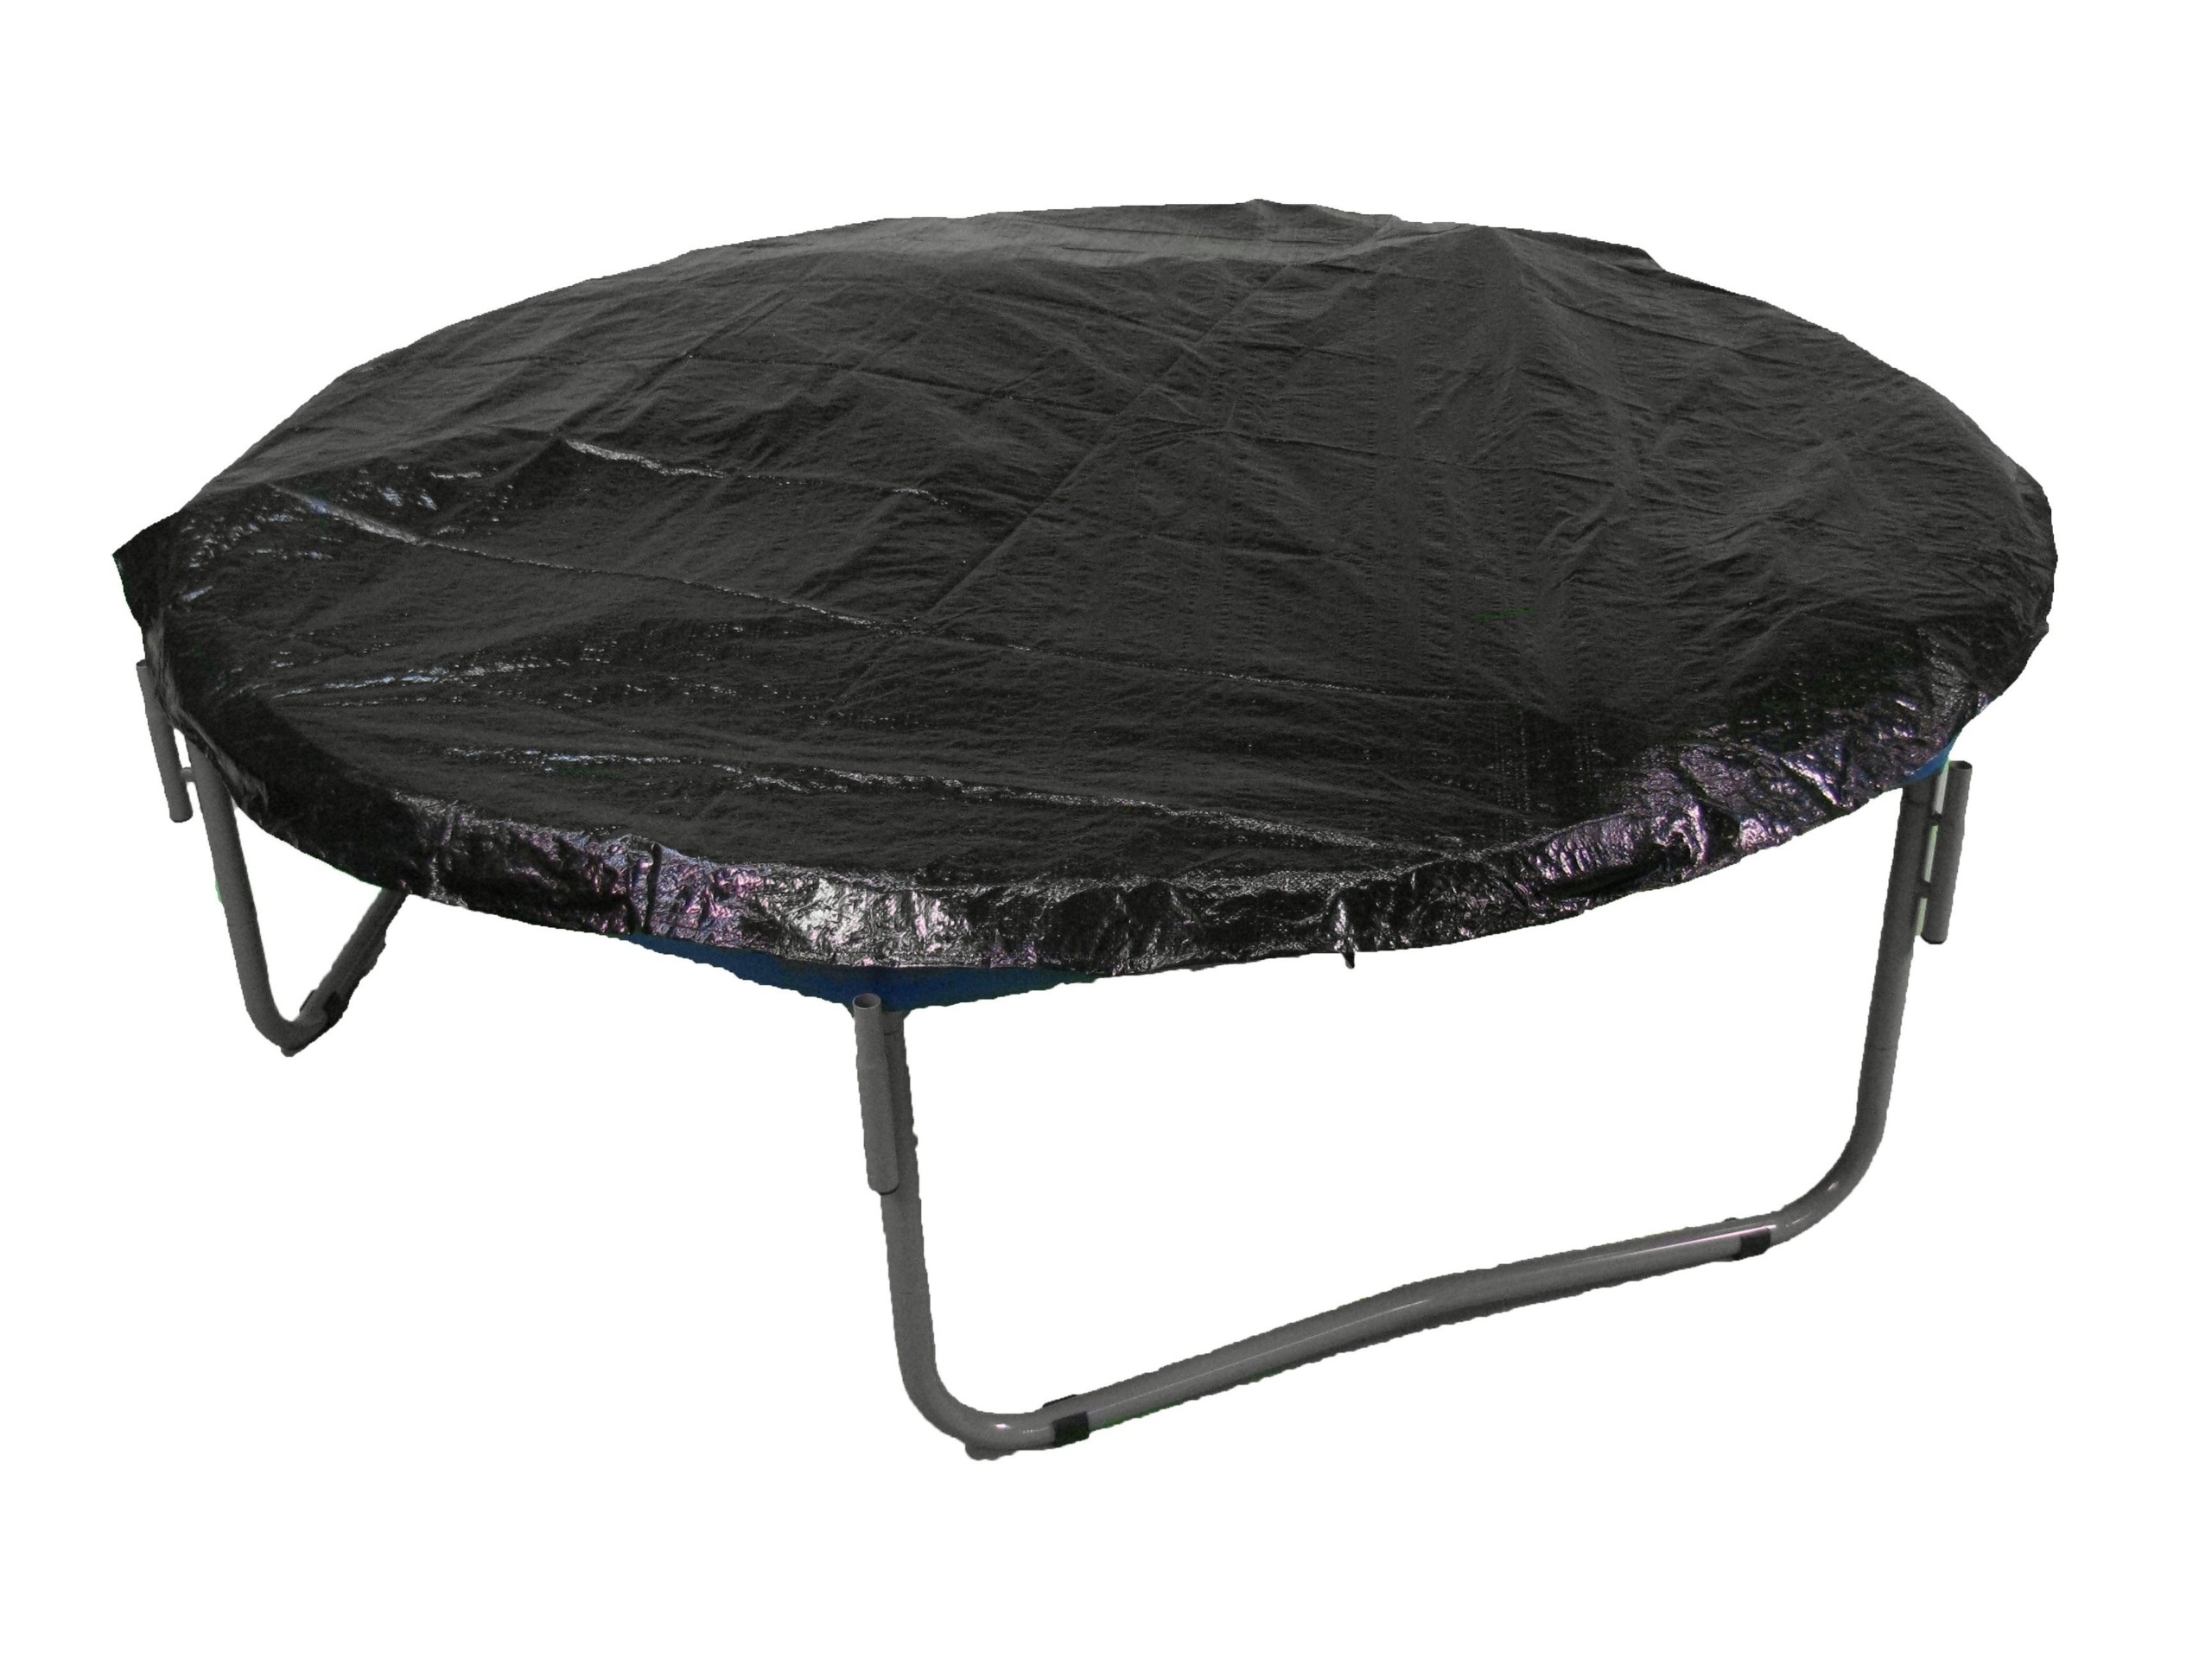 Greenbay 8FT Outdoor Trampoline Universal Rain Dust Cover Weather Protective Guard 